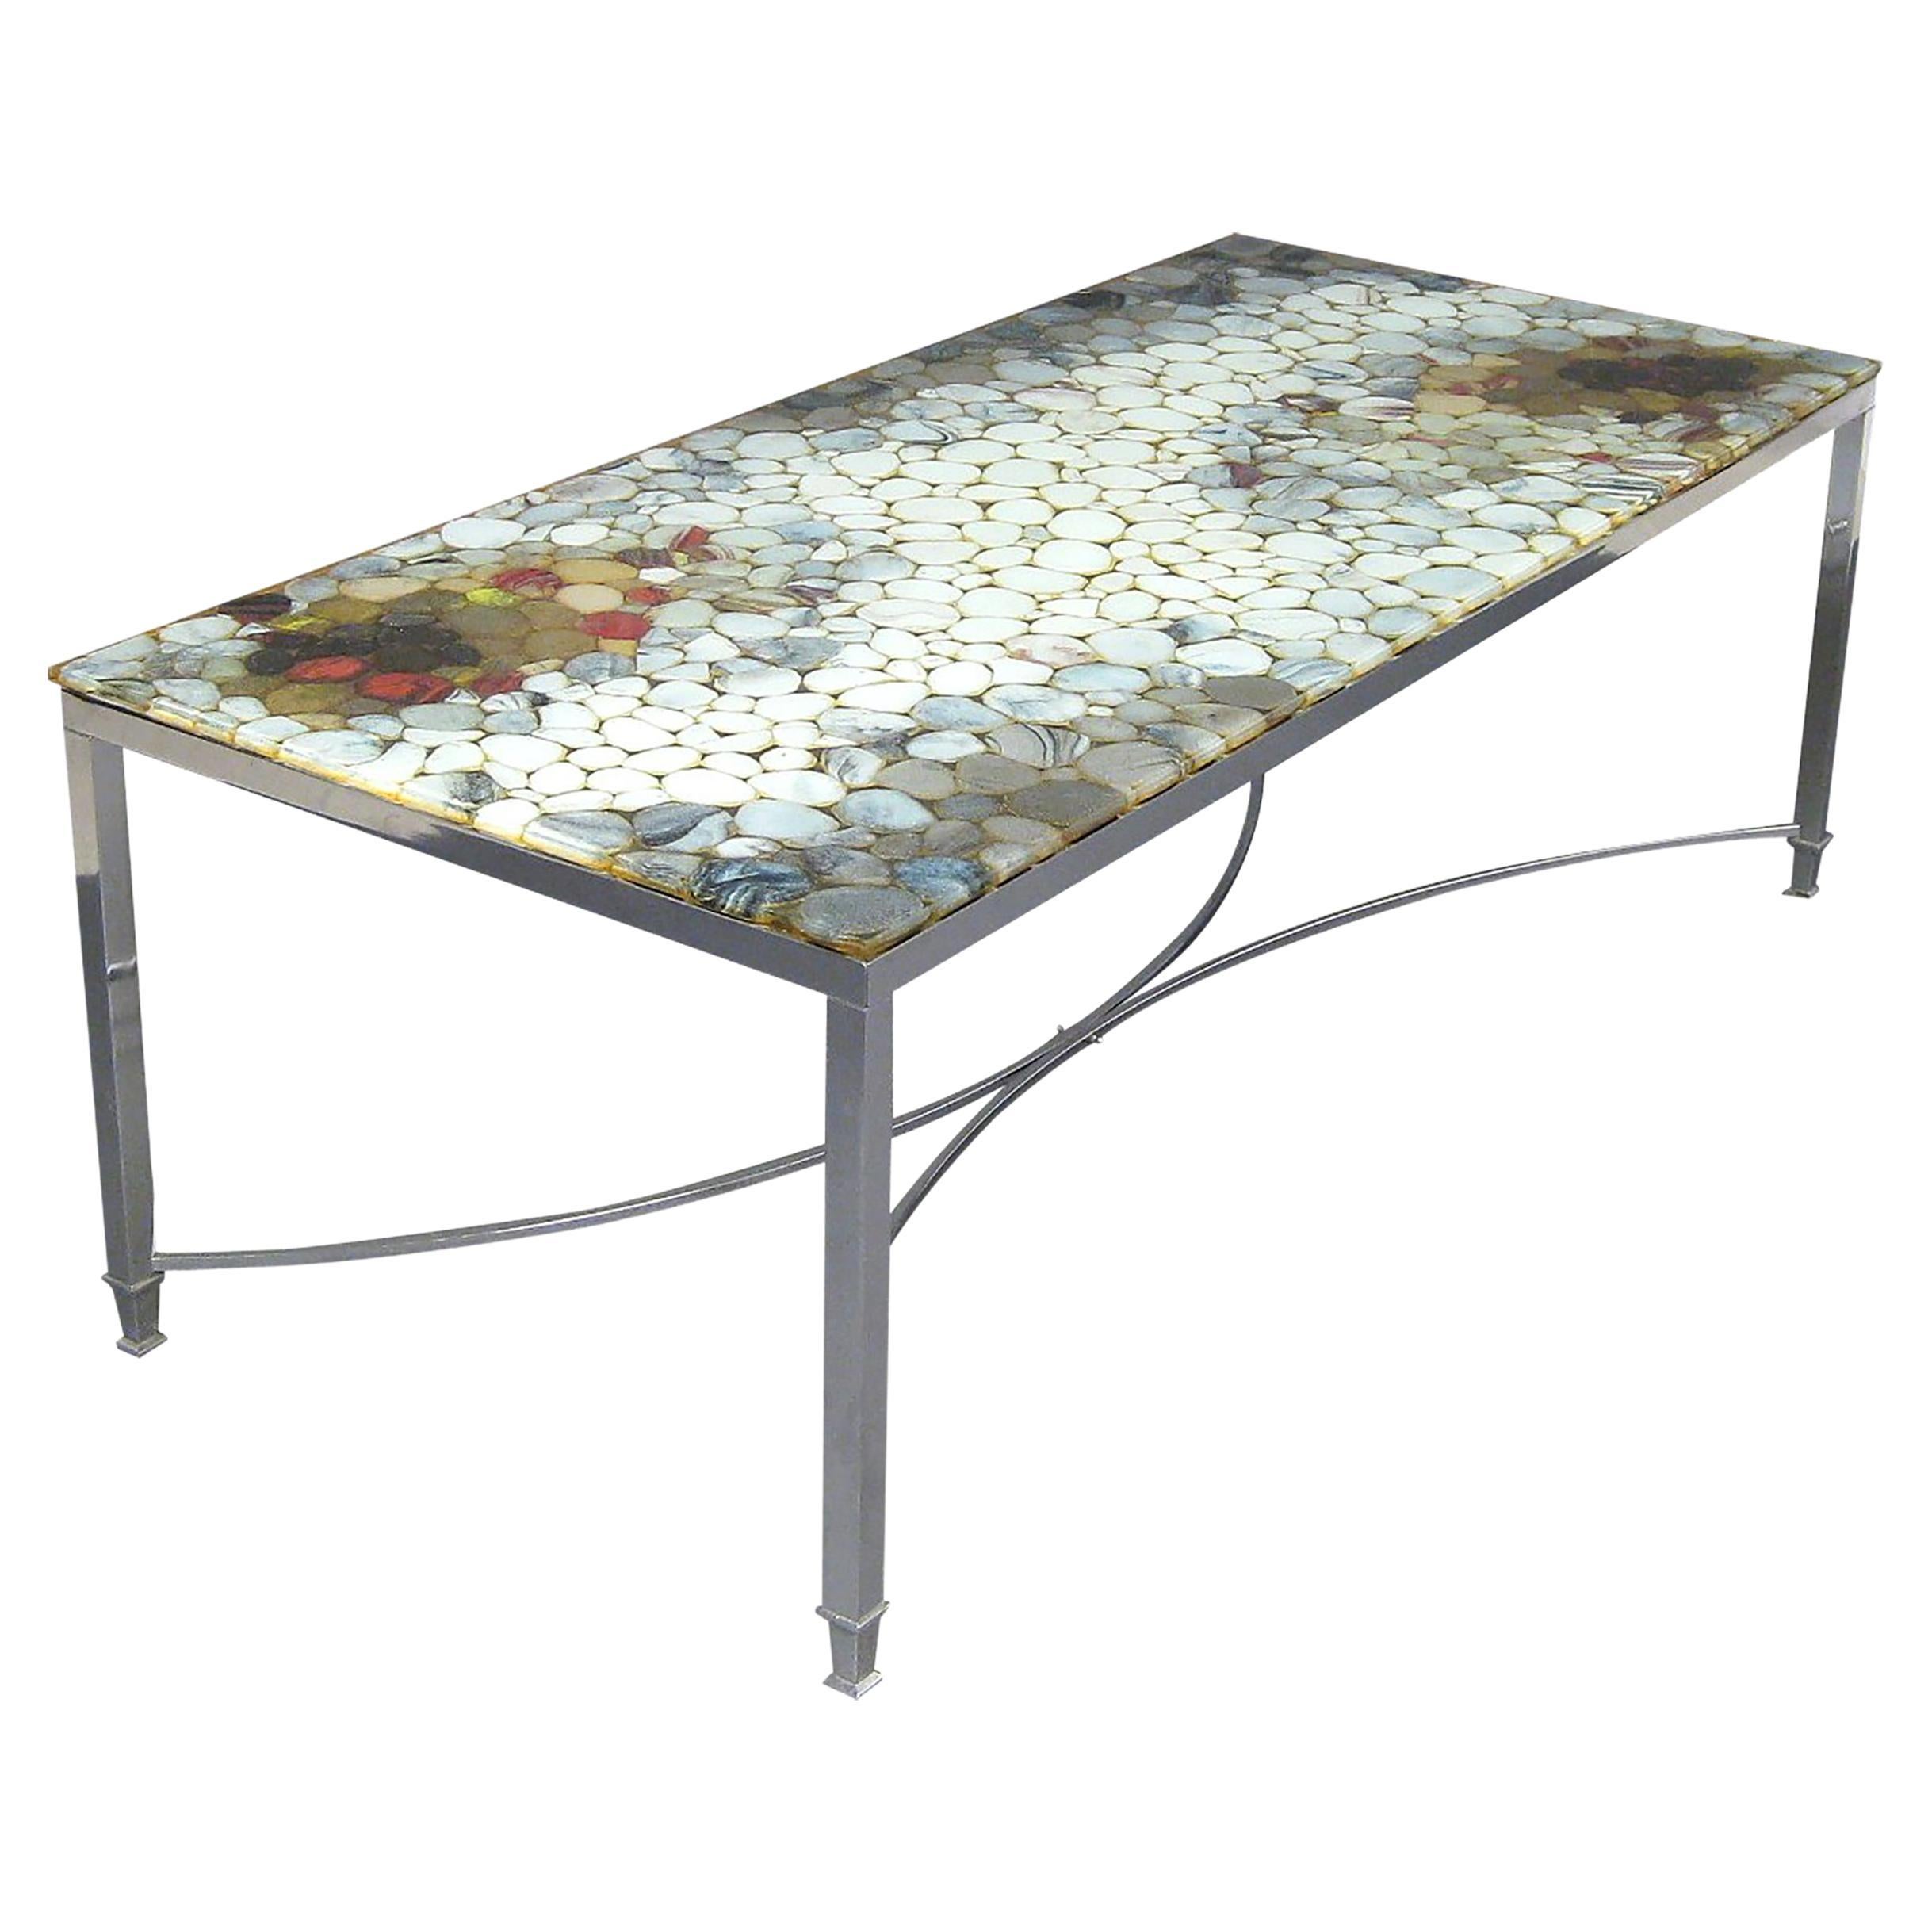 1970s Coffee Table With Natural Stone and Acrylic Top, Danish For Sale